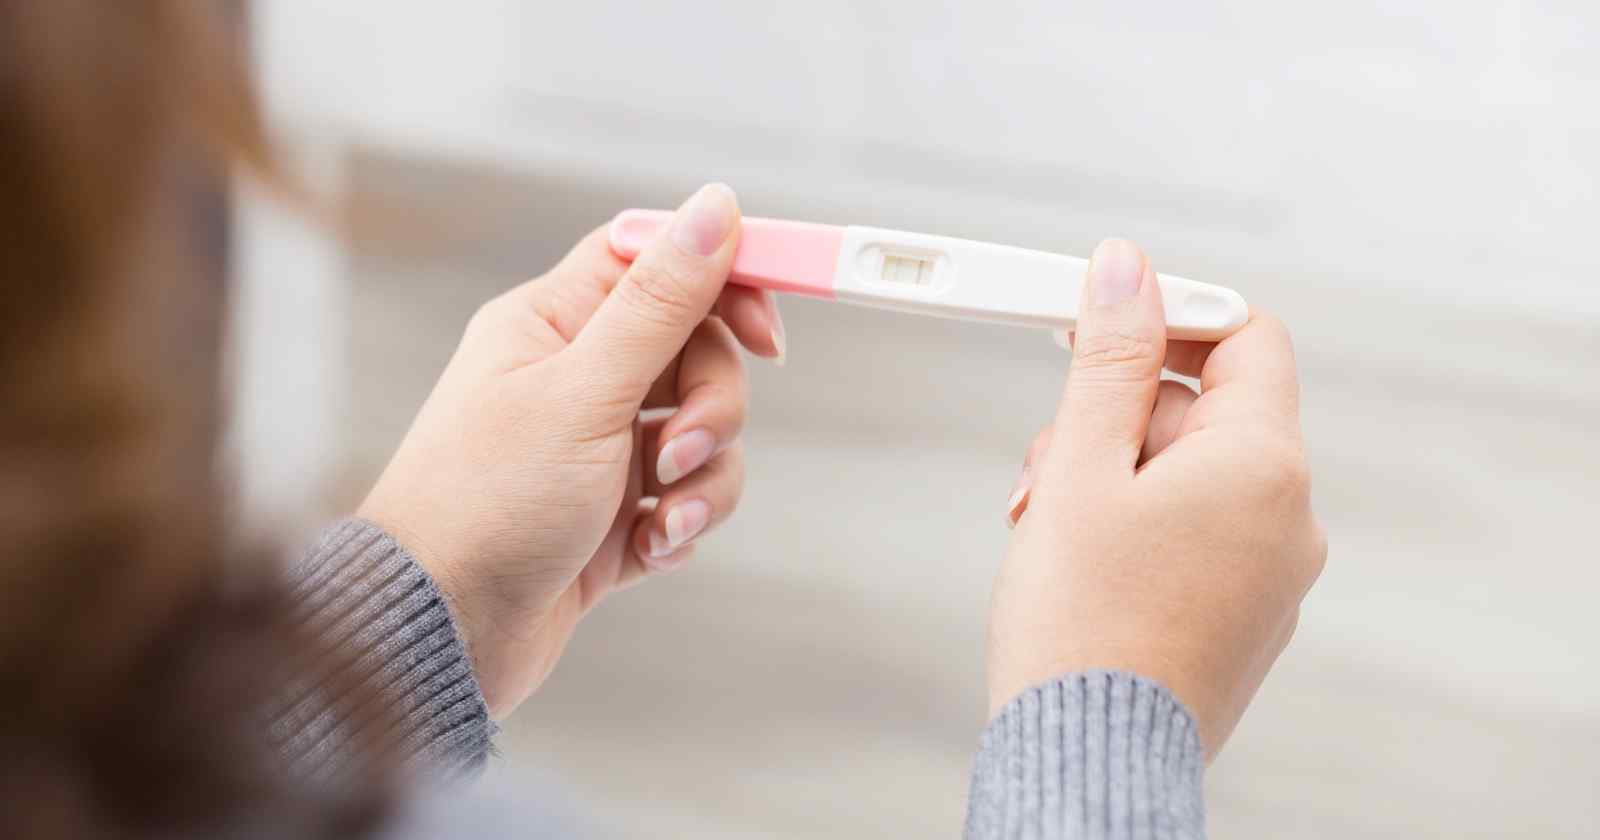 What does getting a negative pregnancy test result mean?